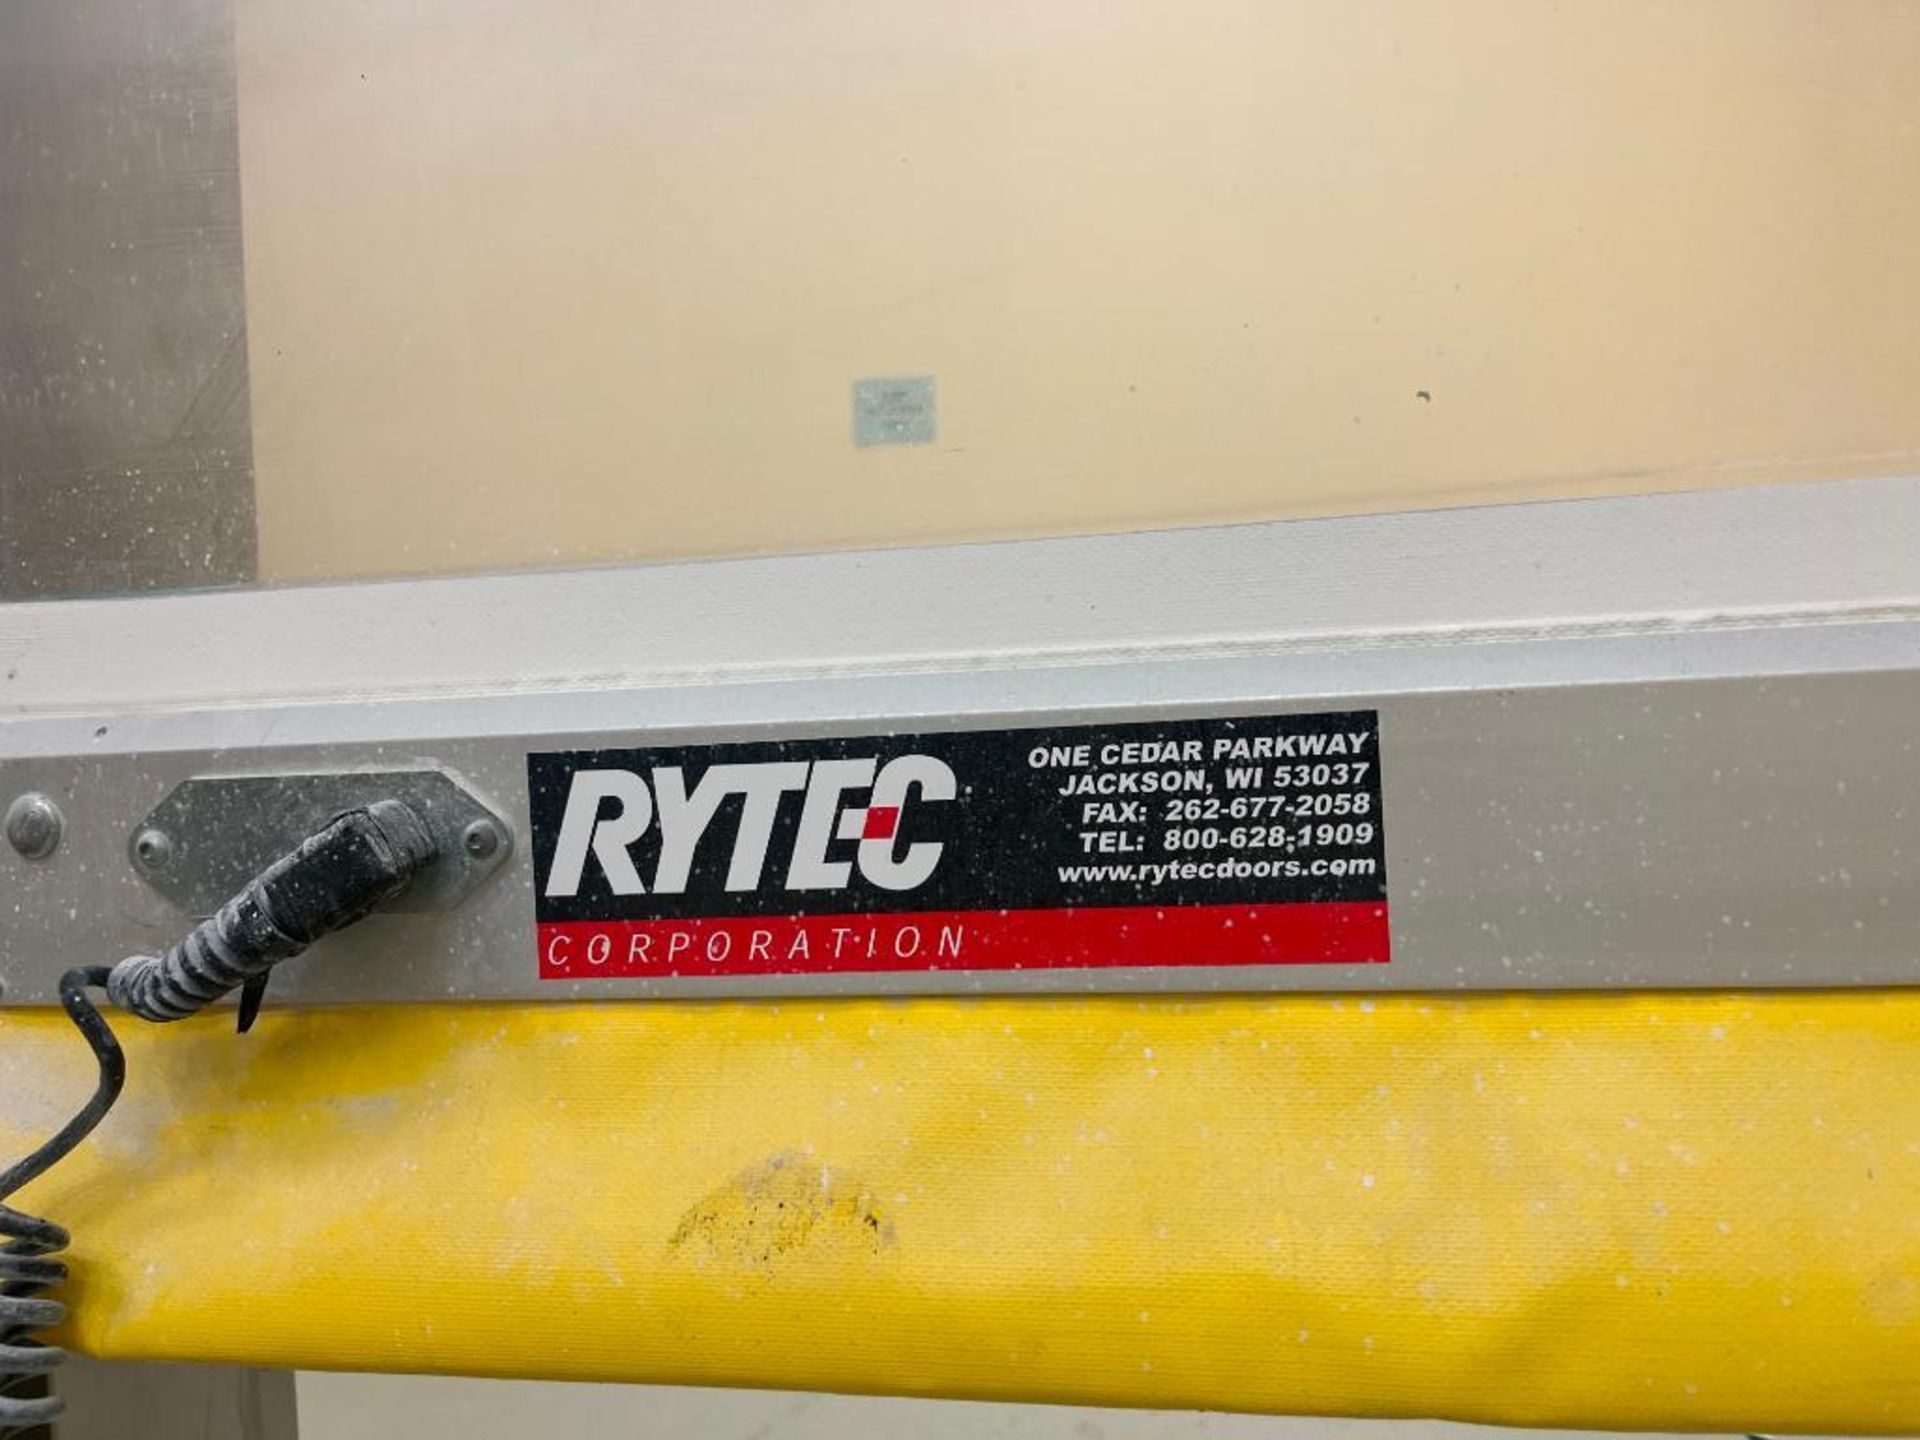 Rytec Rollup Door, Approximate Opening 8' W x 10' T - Image 6 of 7